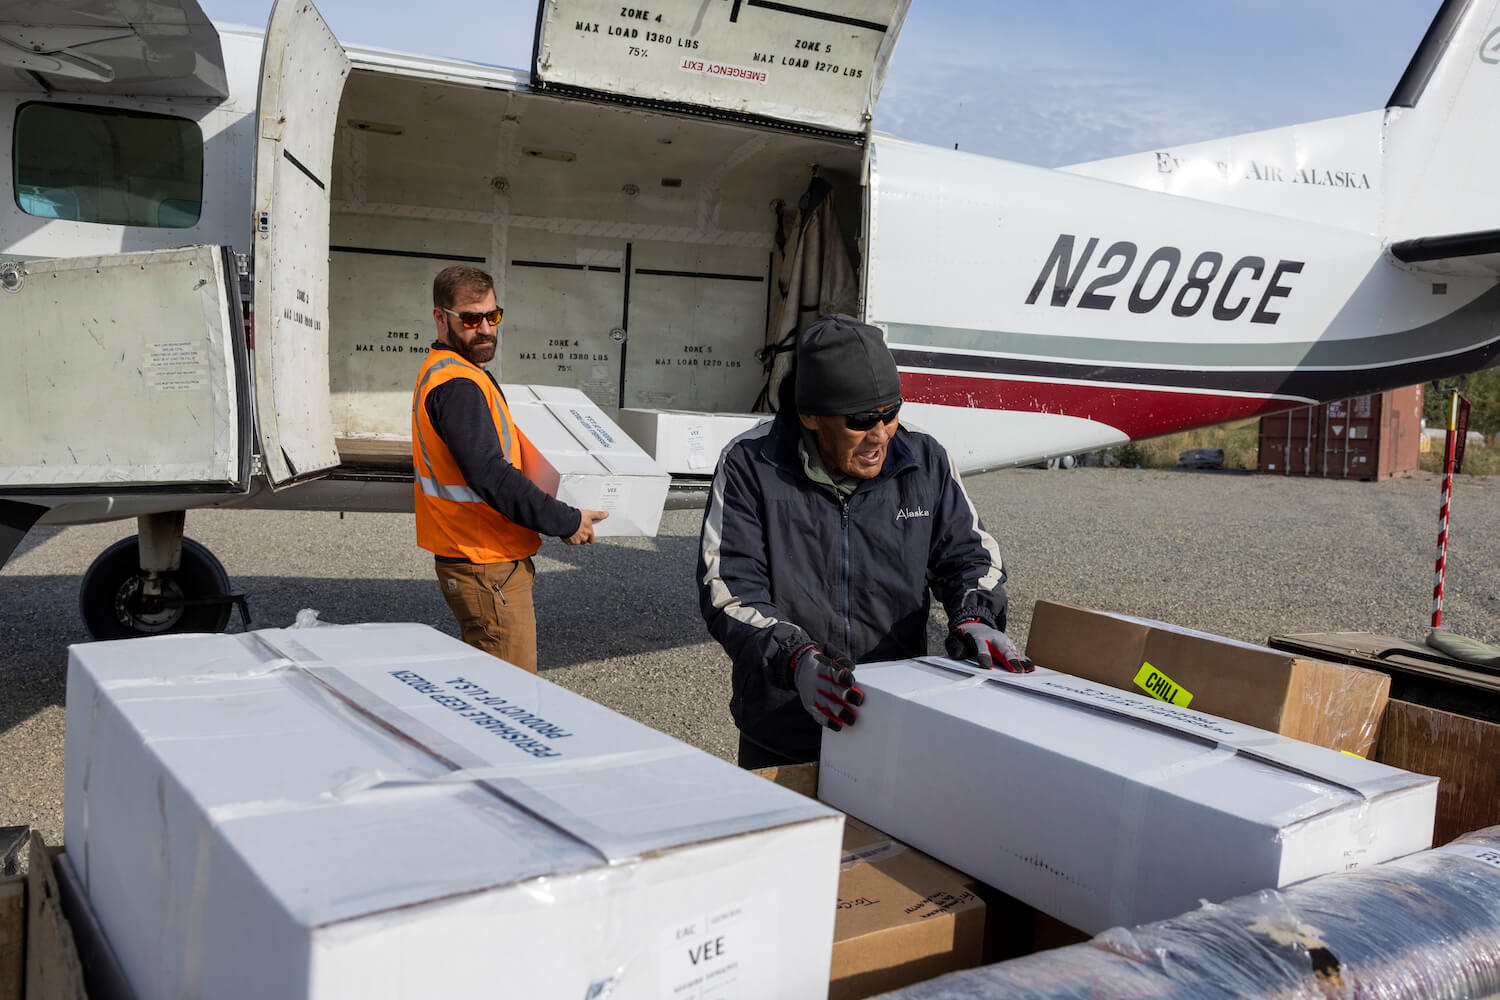 A charter flight unloads Bristol Bay salmon in Venetie, one of the 42 Interior villages that received fish donations. November 2021